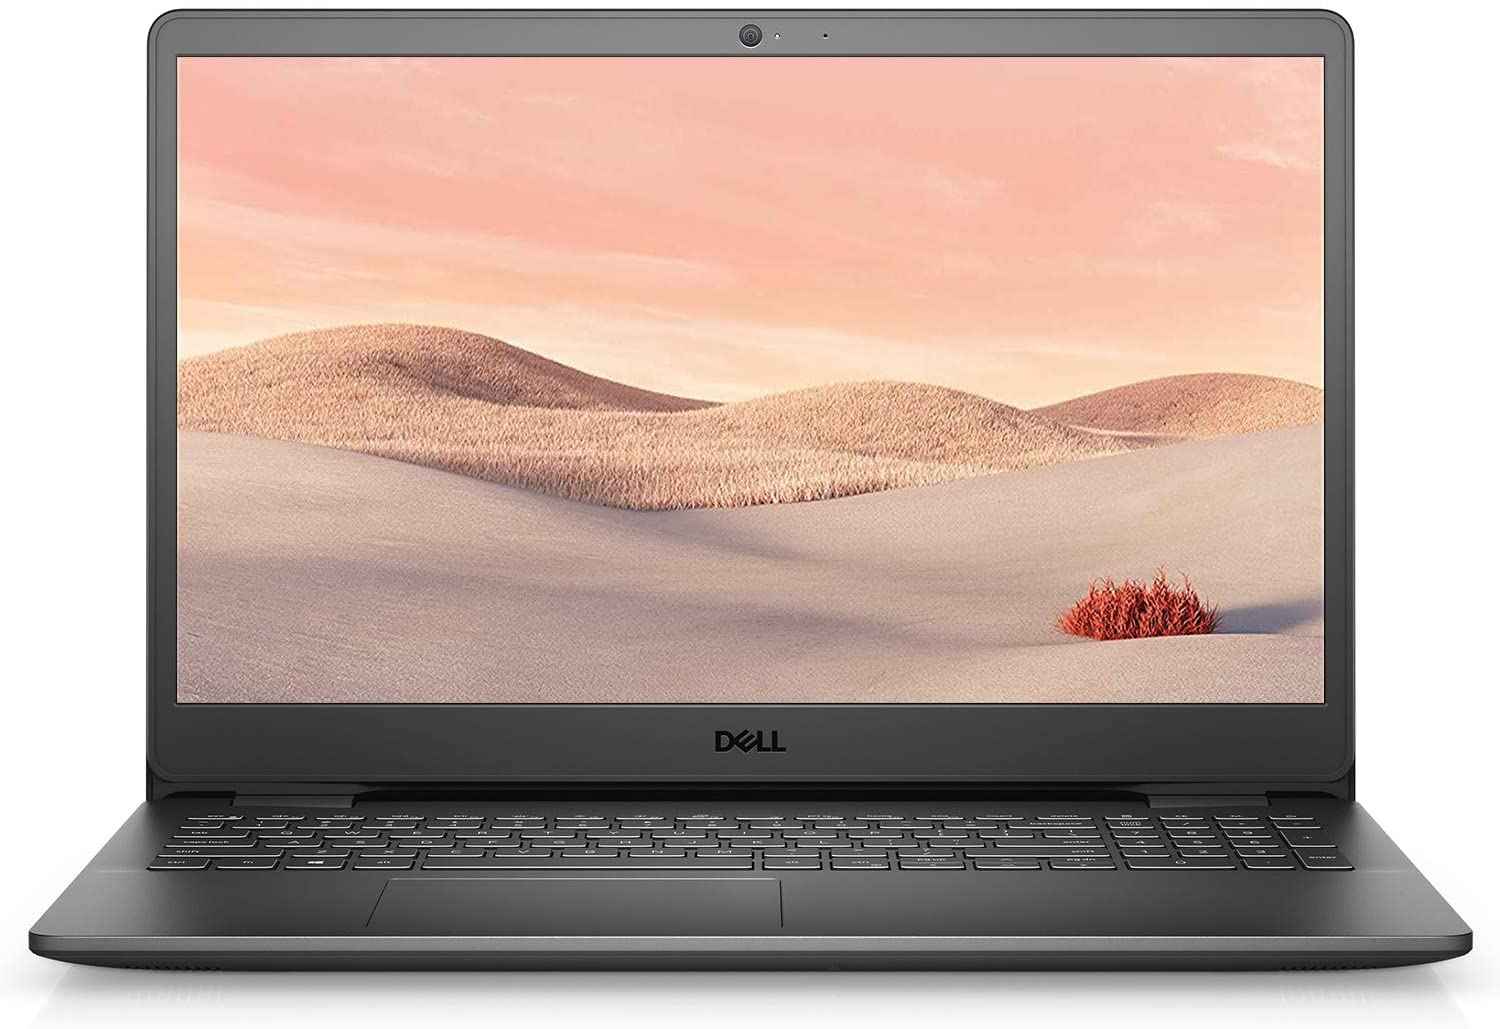 The NetDigz Editors rate the Dell Inspiron 3000 as the Best Budget Laptop for College.